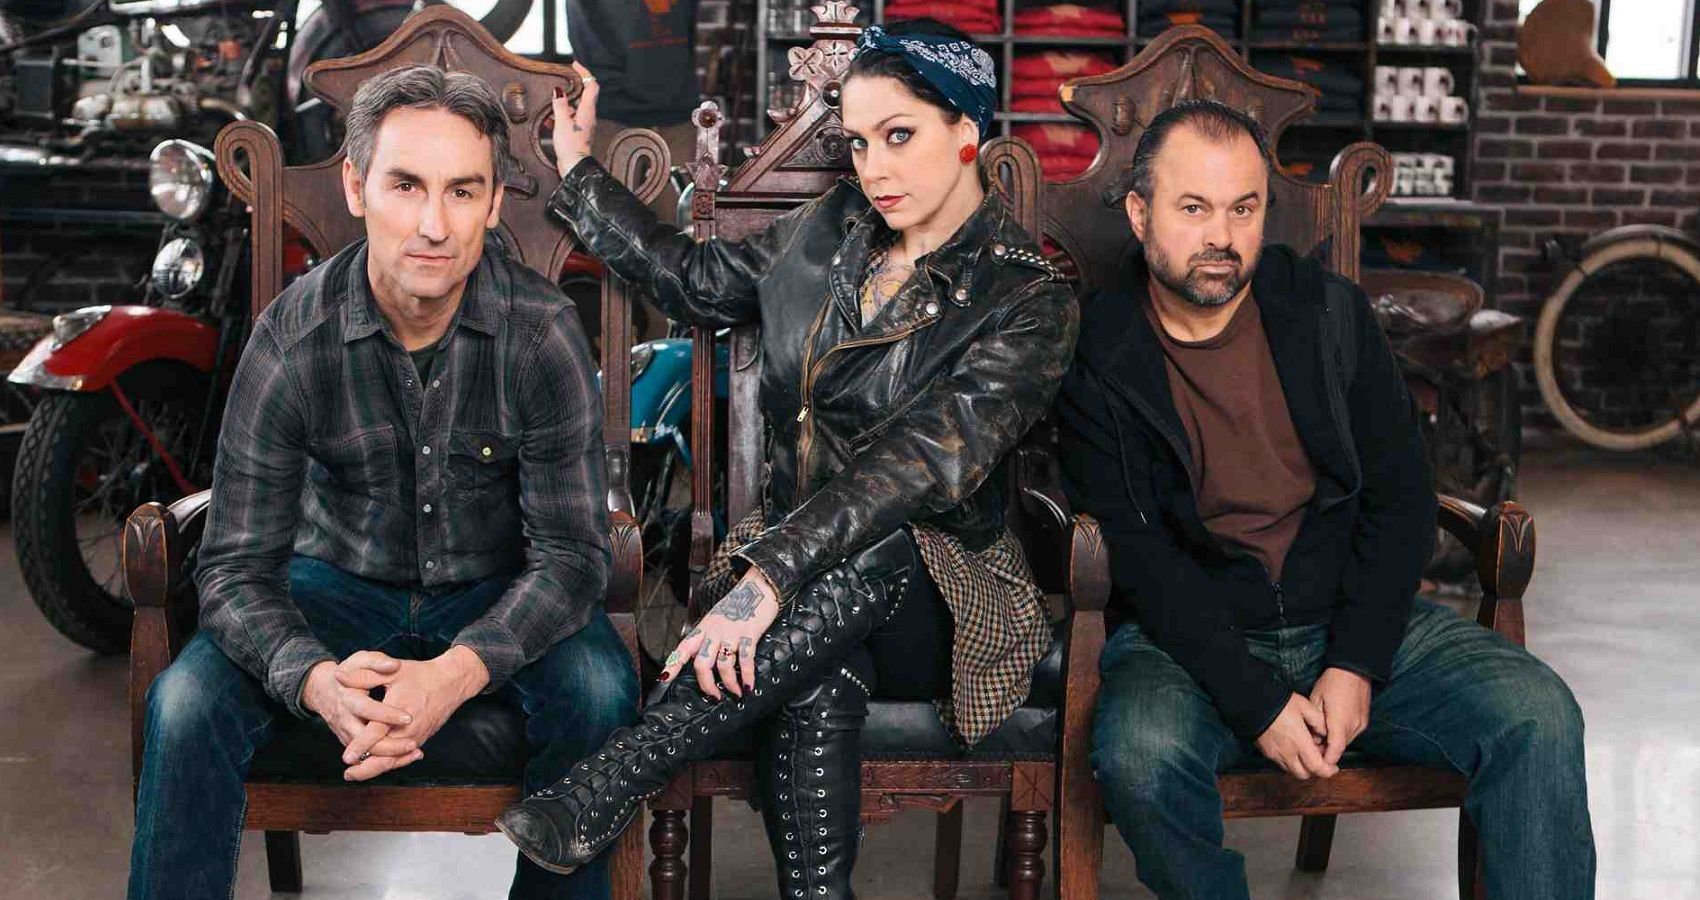 Inside American Pickers Star Frank Fritz And Danielle Colby's